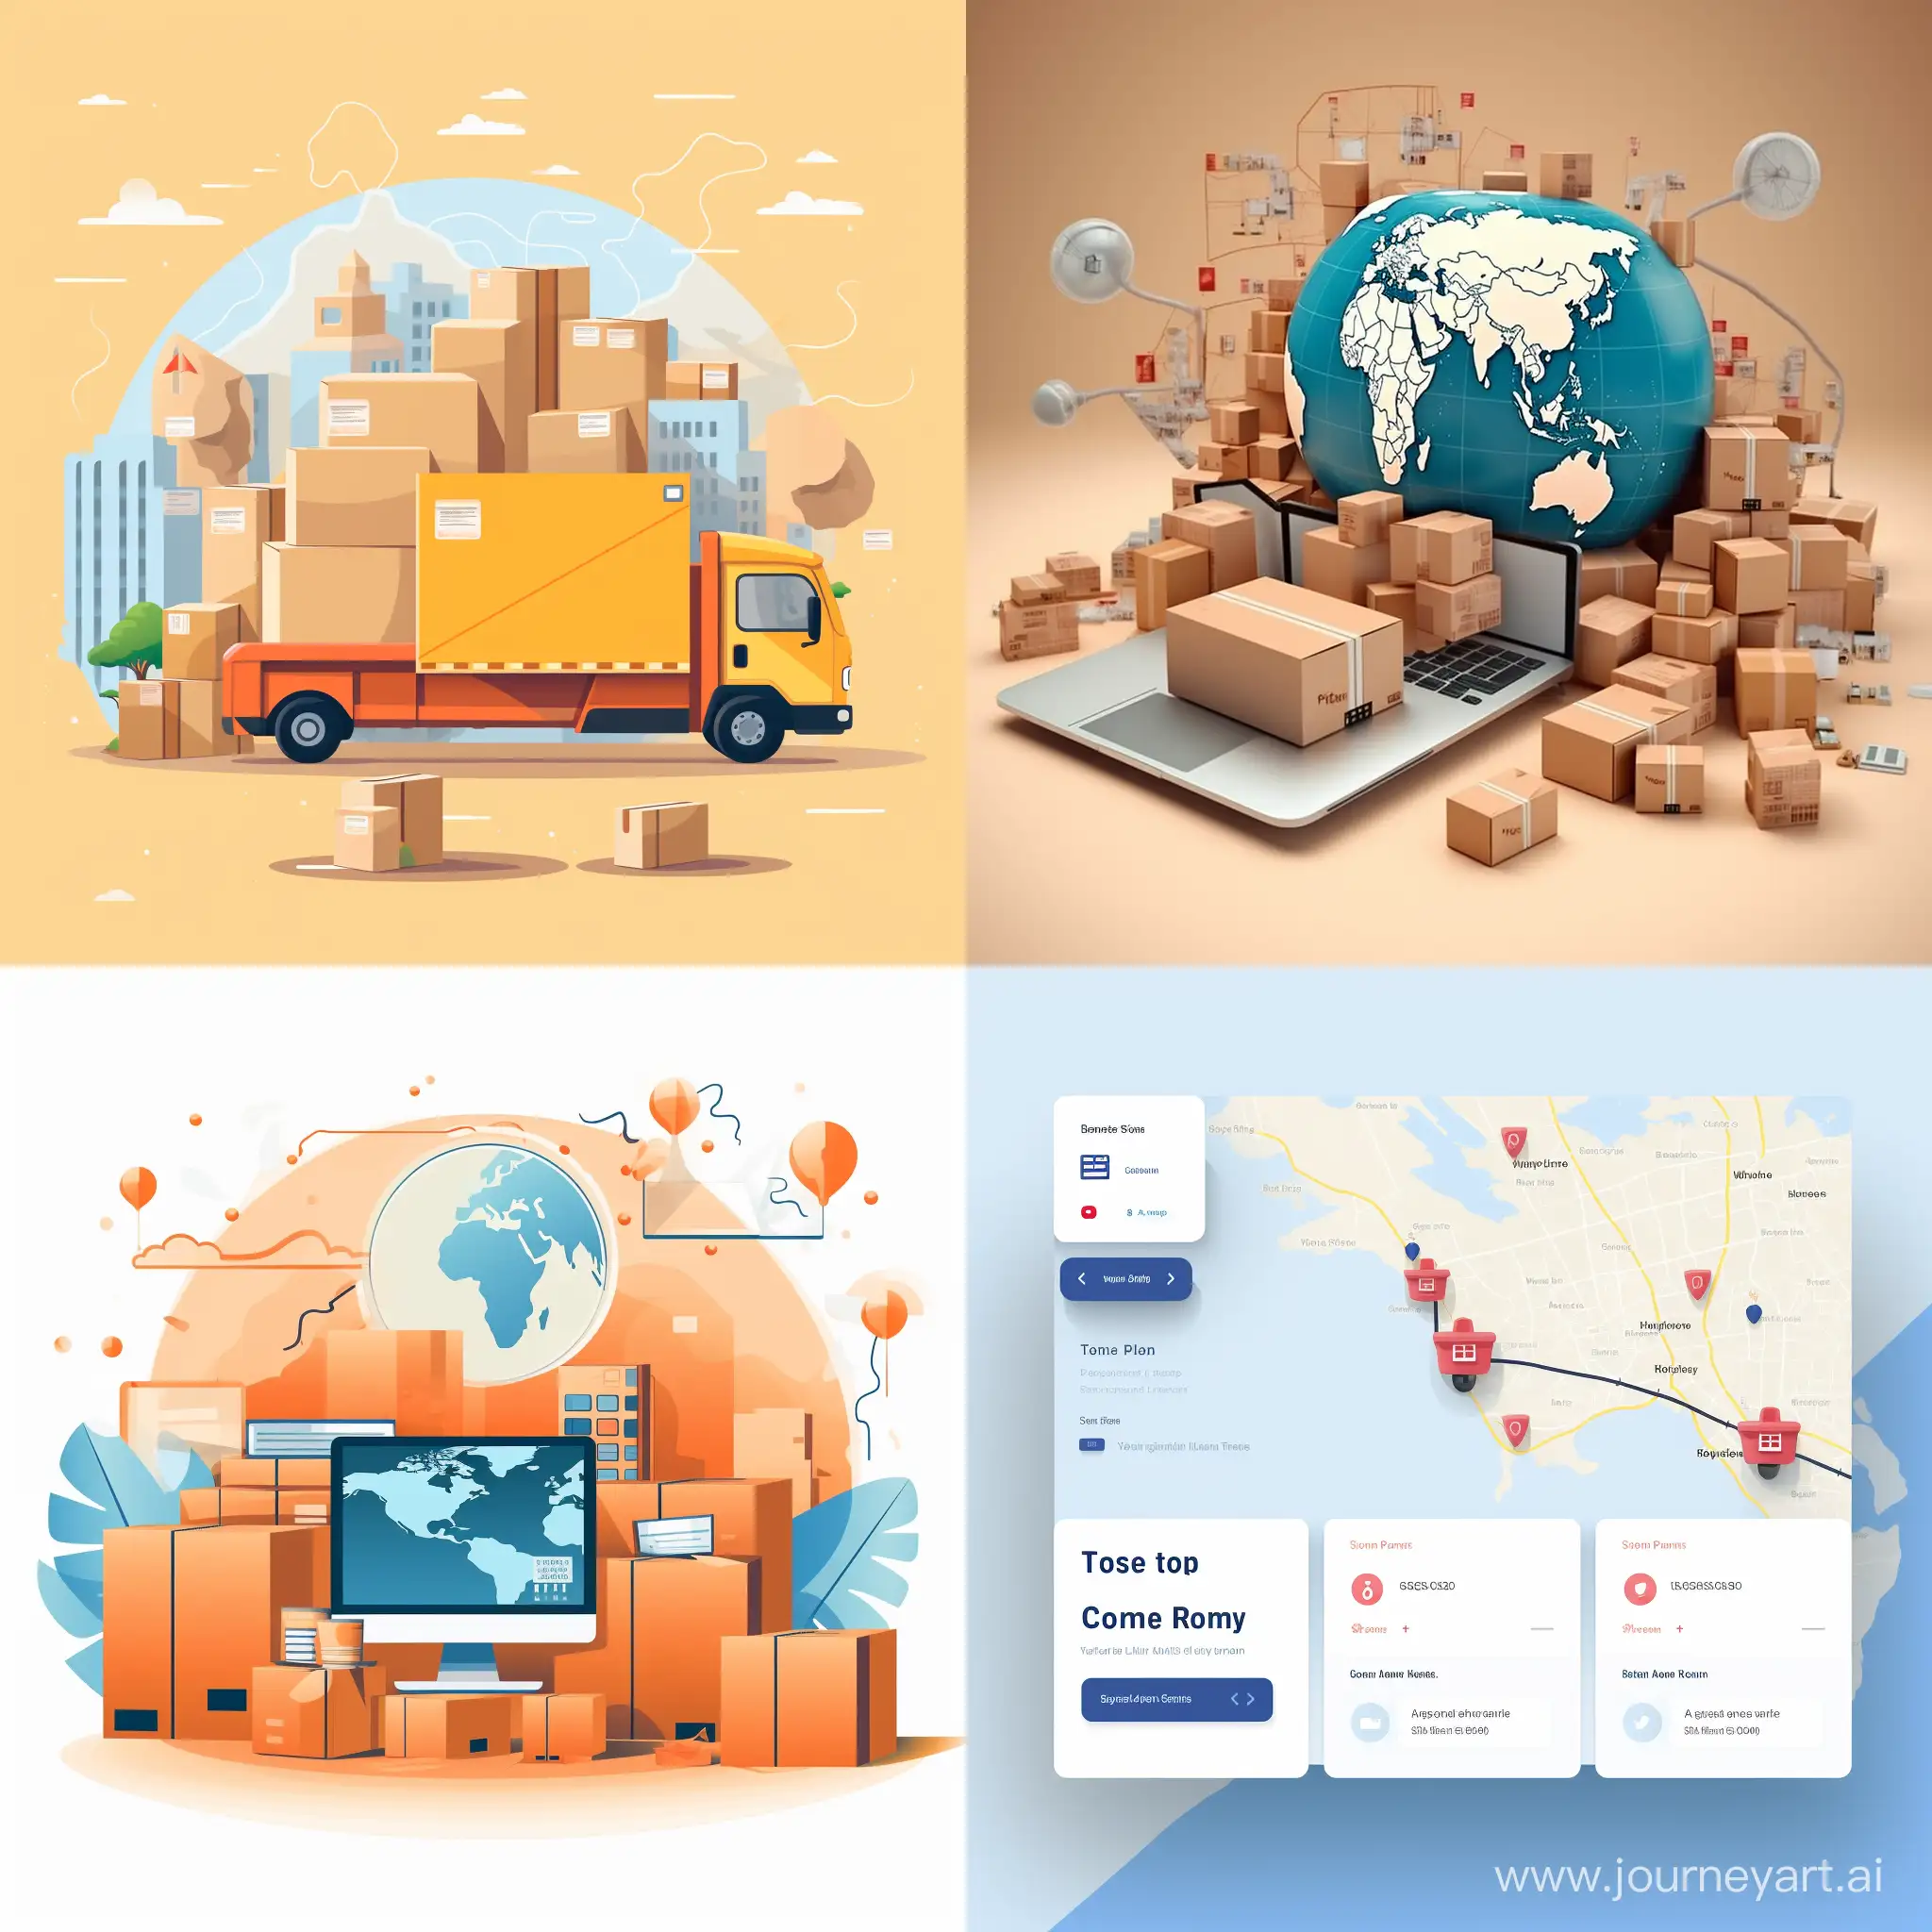 Efficient-Parcel-Tracking-Service-Realtime-Status-Updates-by-Tracking-Number